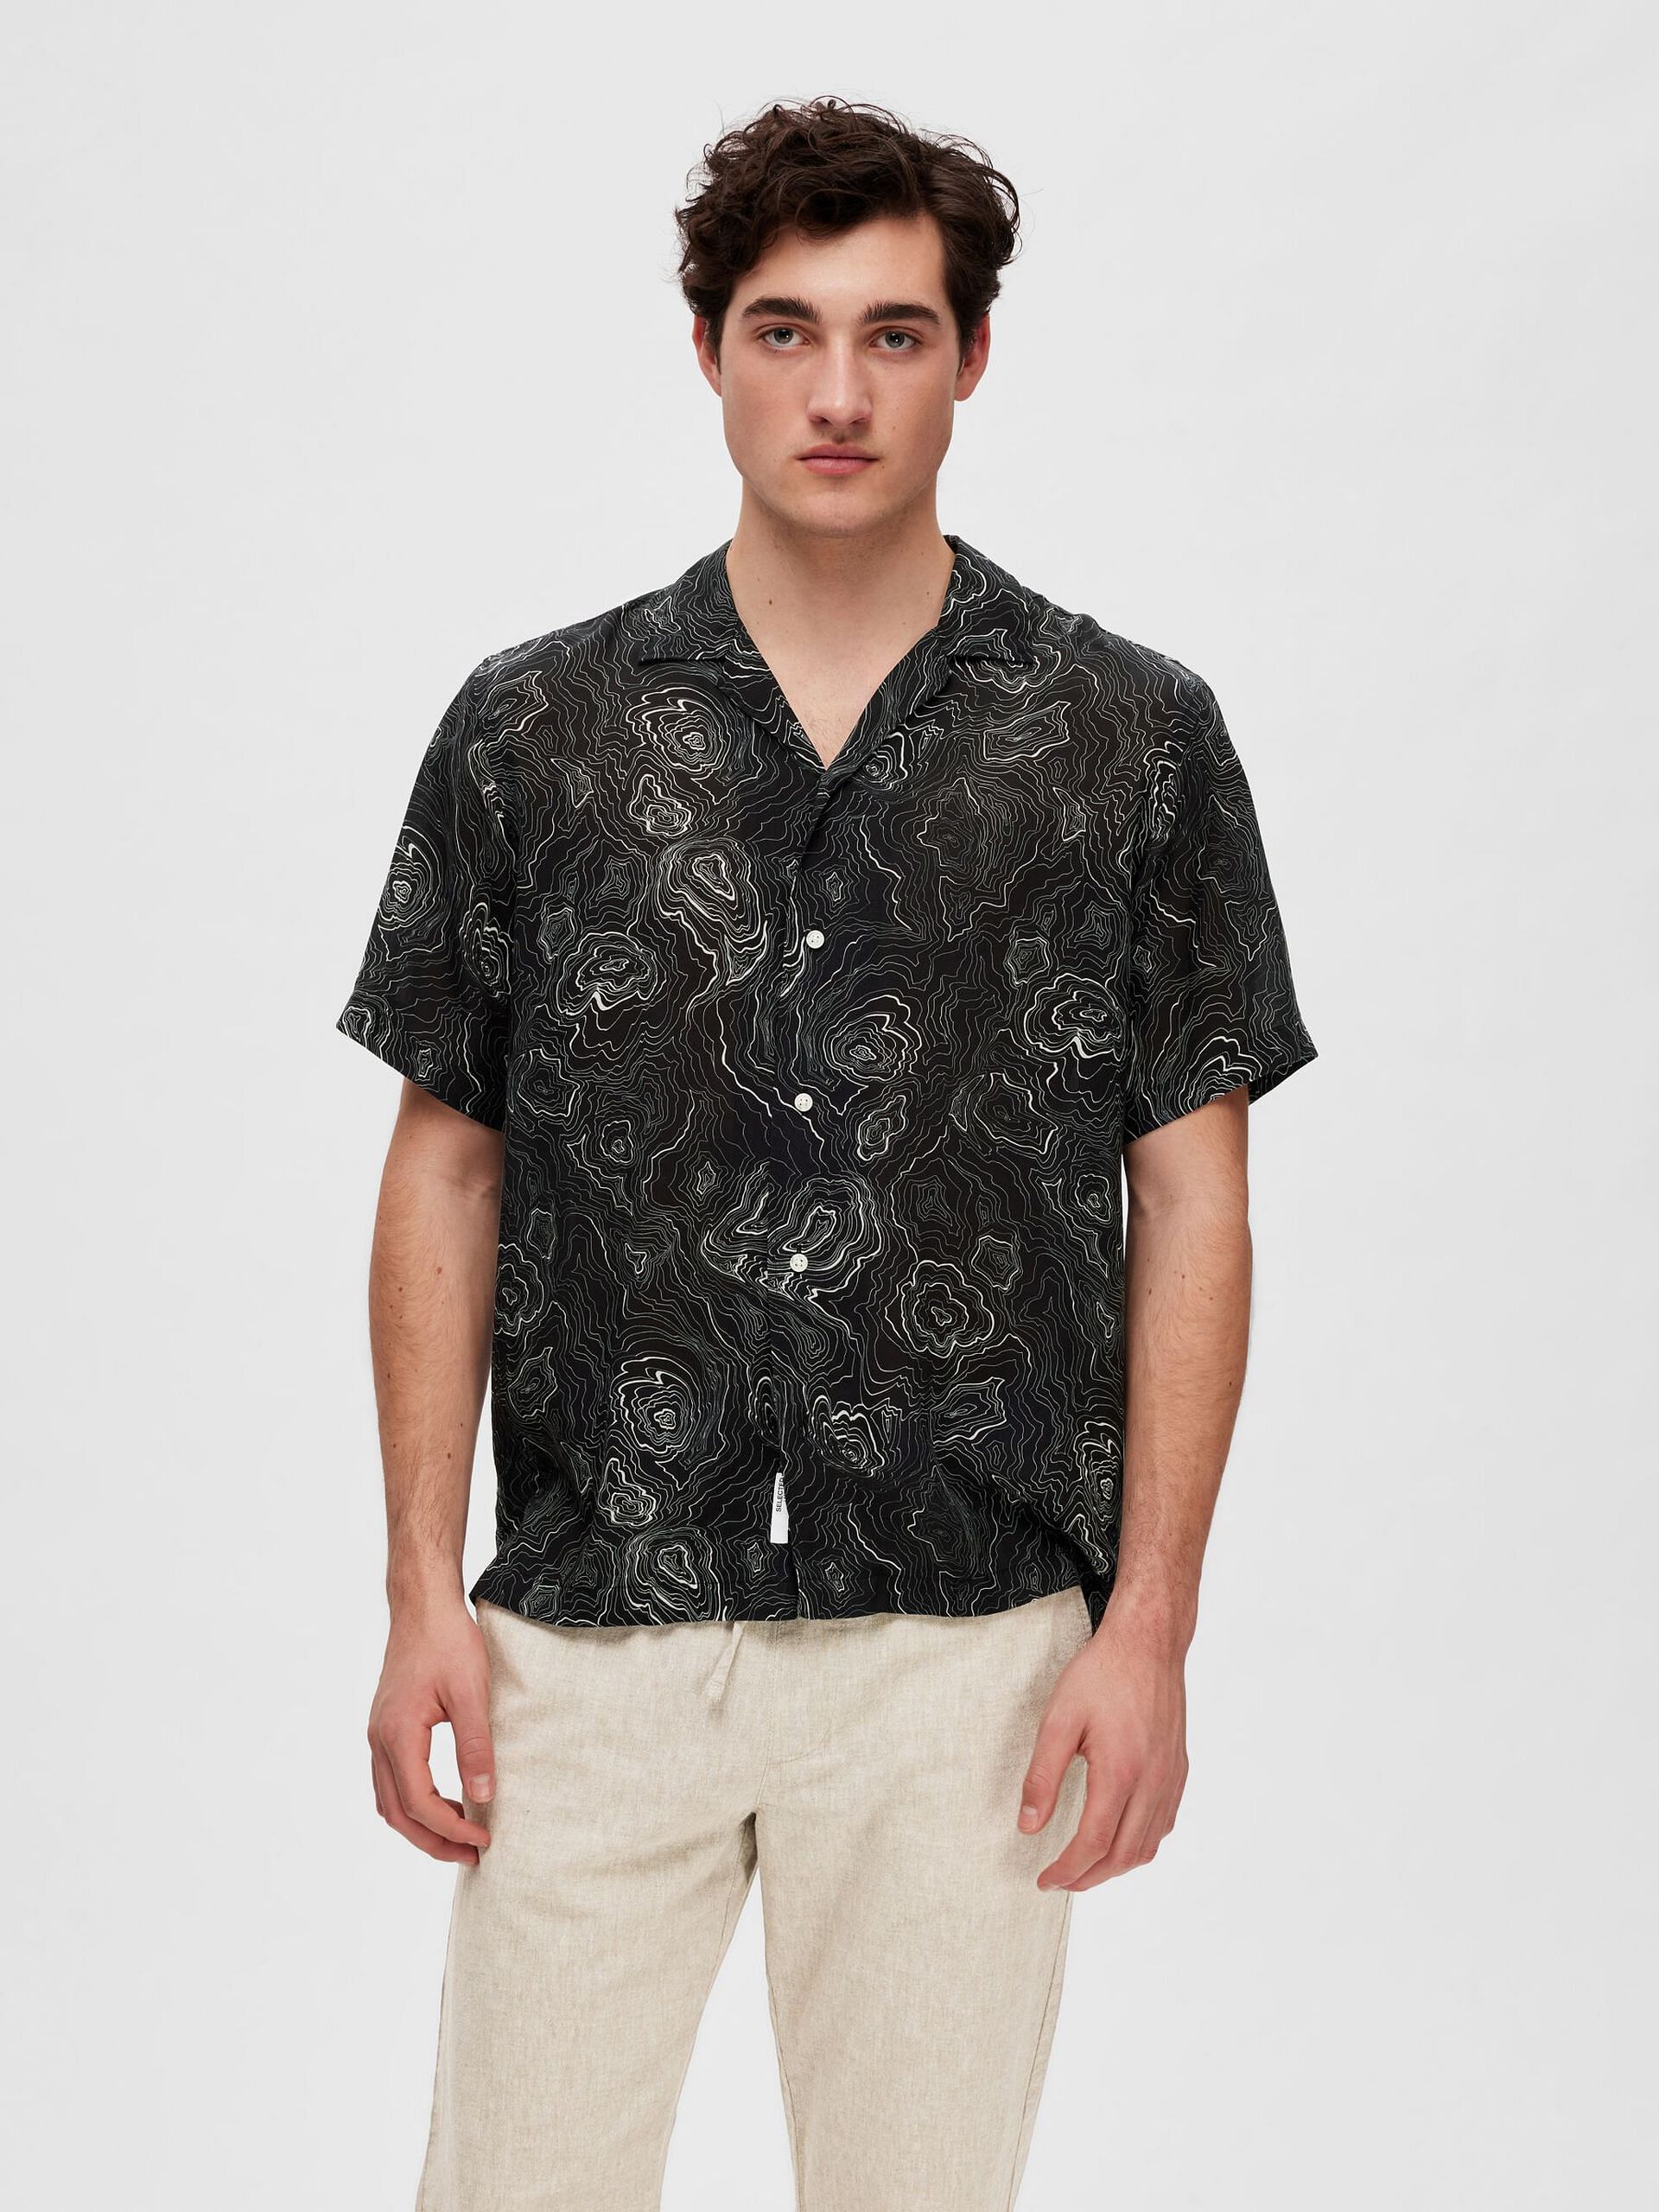 Buy Latest Short Sleeve Caual Shirts For Men Online at Best Price  House  of Stori